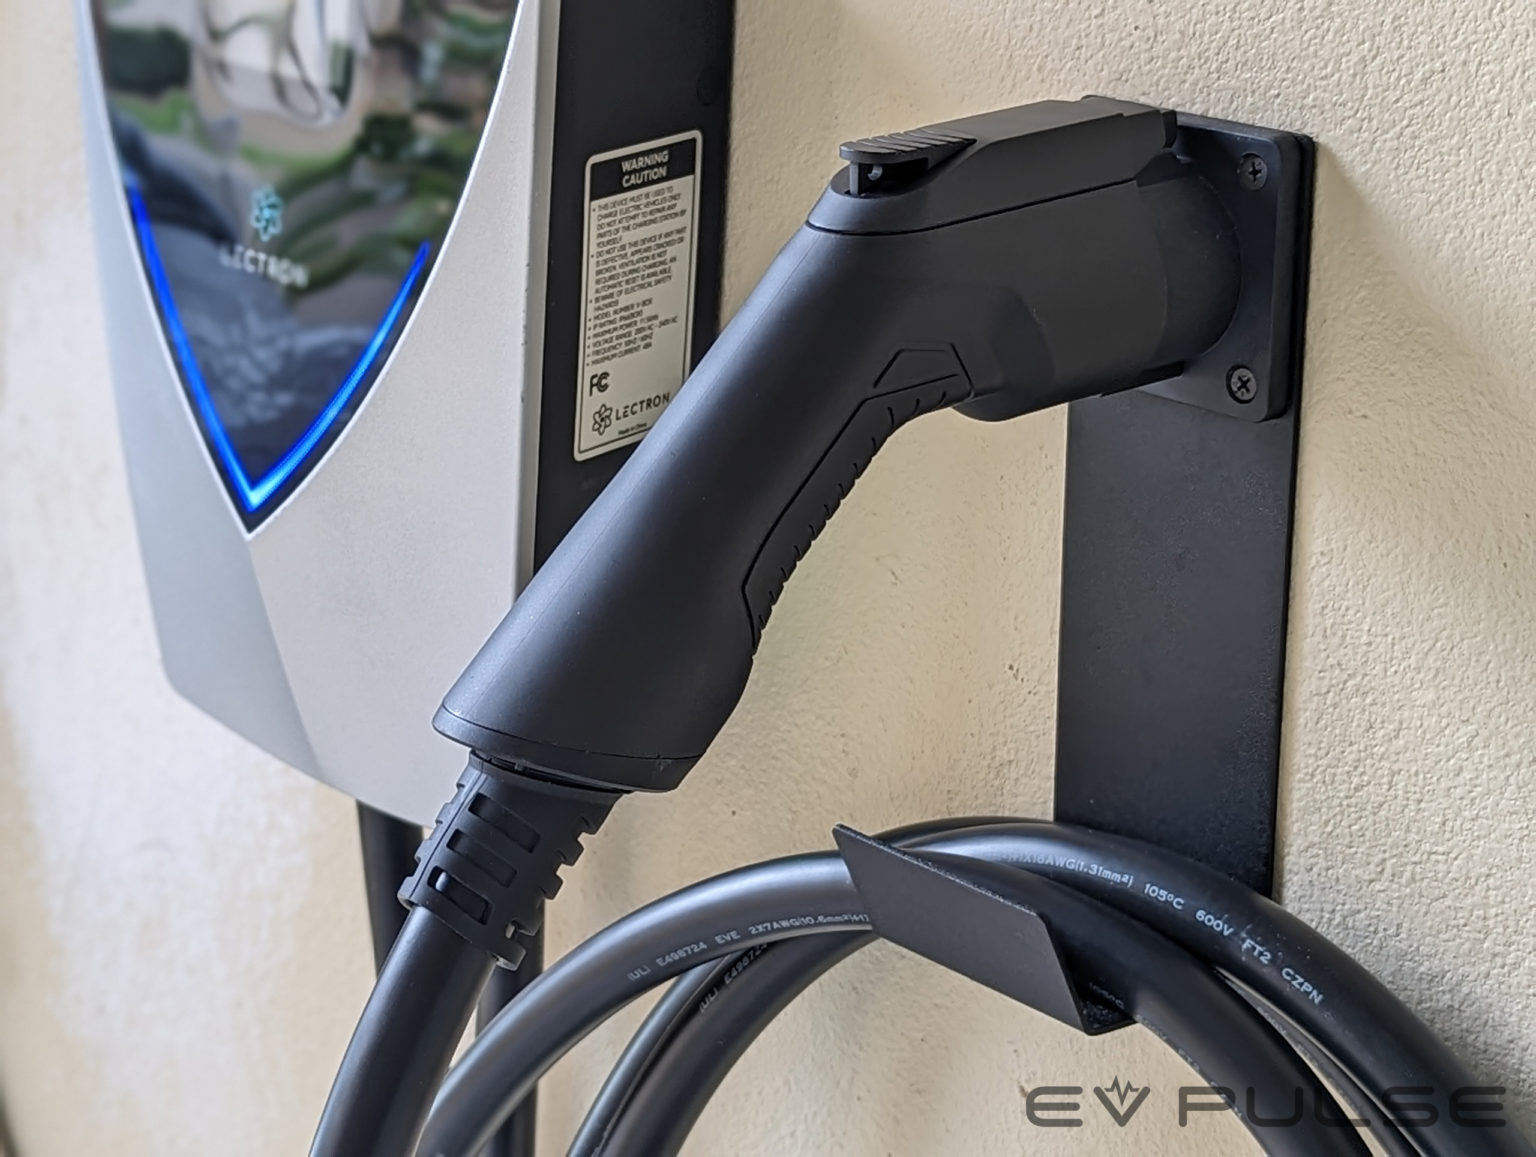 Lectron Portable Electric Vehicle Charger